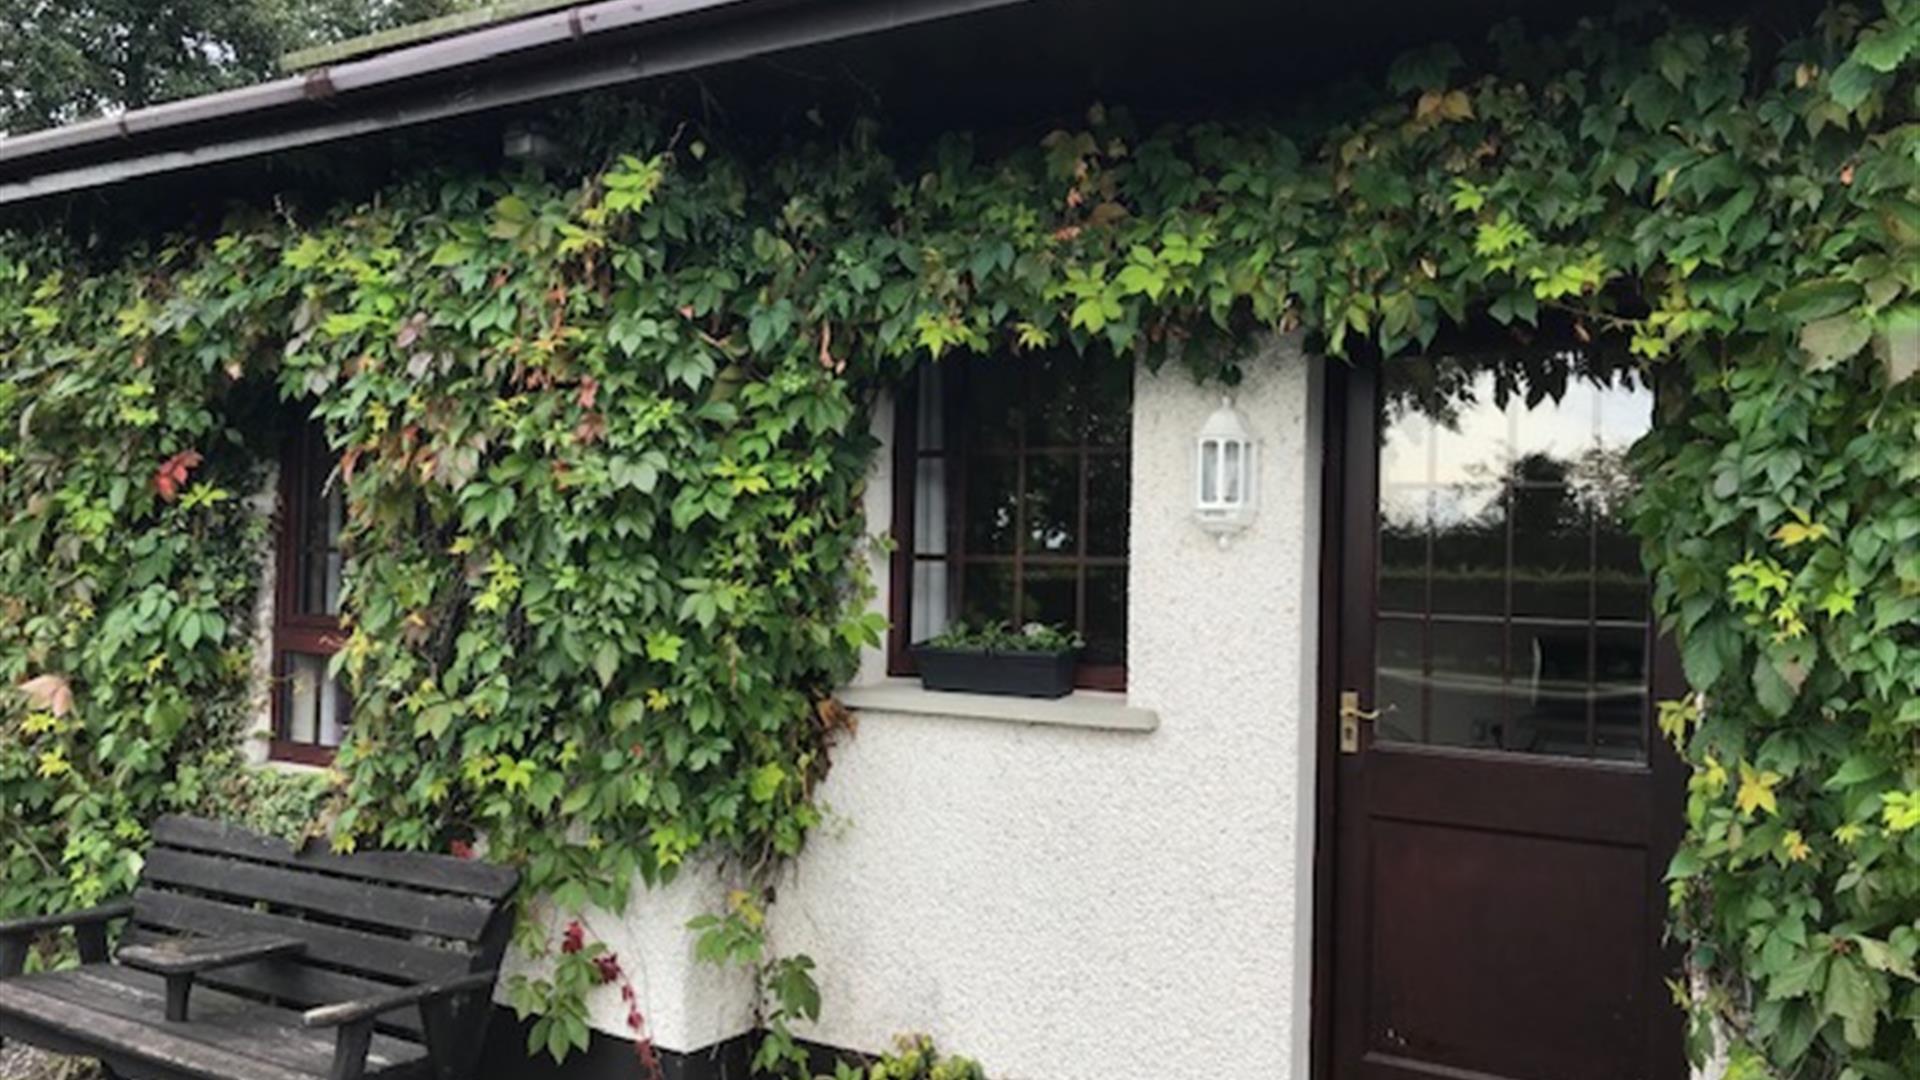 Image shows front of property covered in ivy